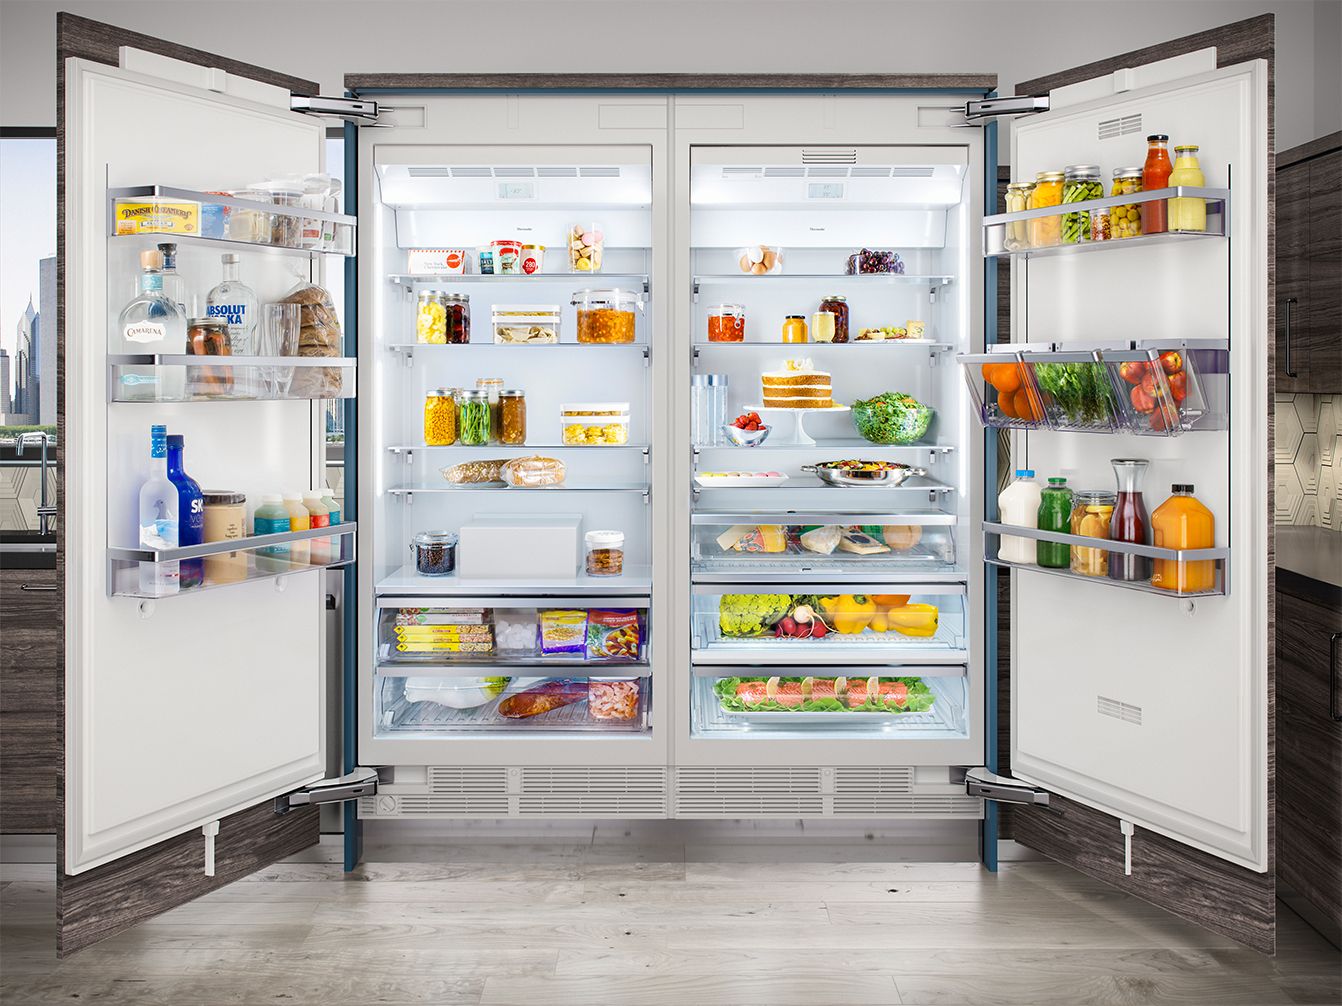 How To Decide Which Refrigerator To Buy Online 2021